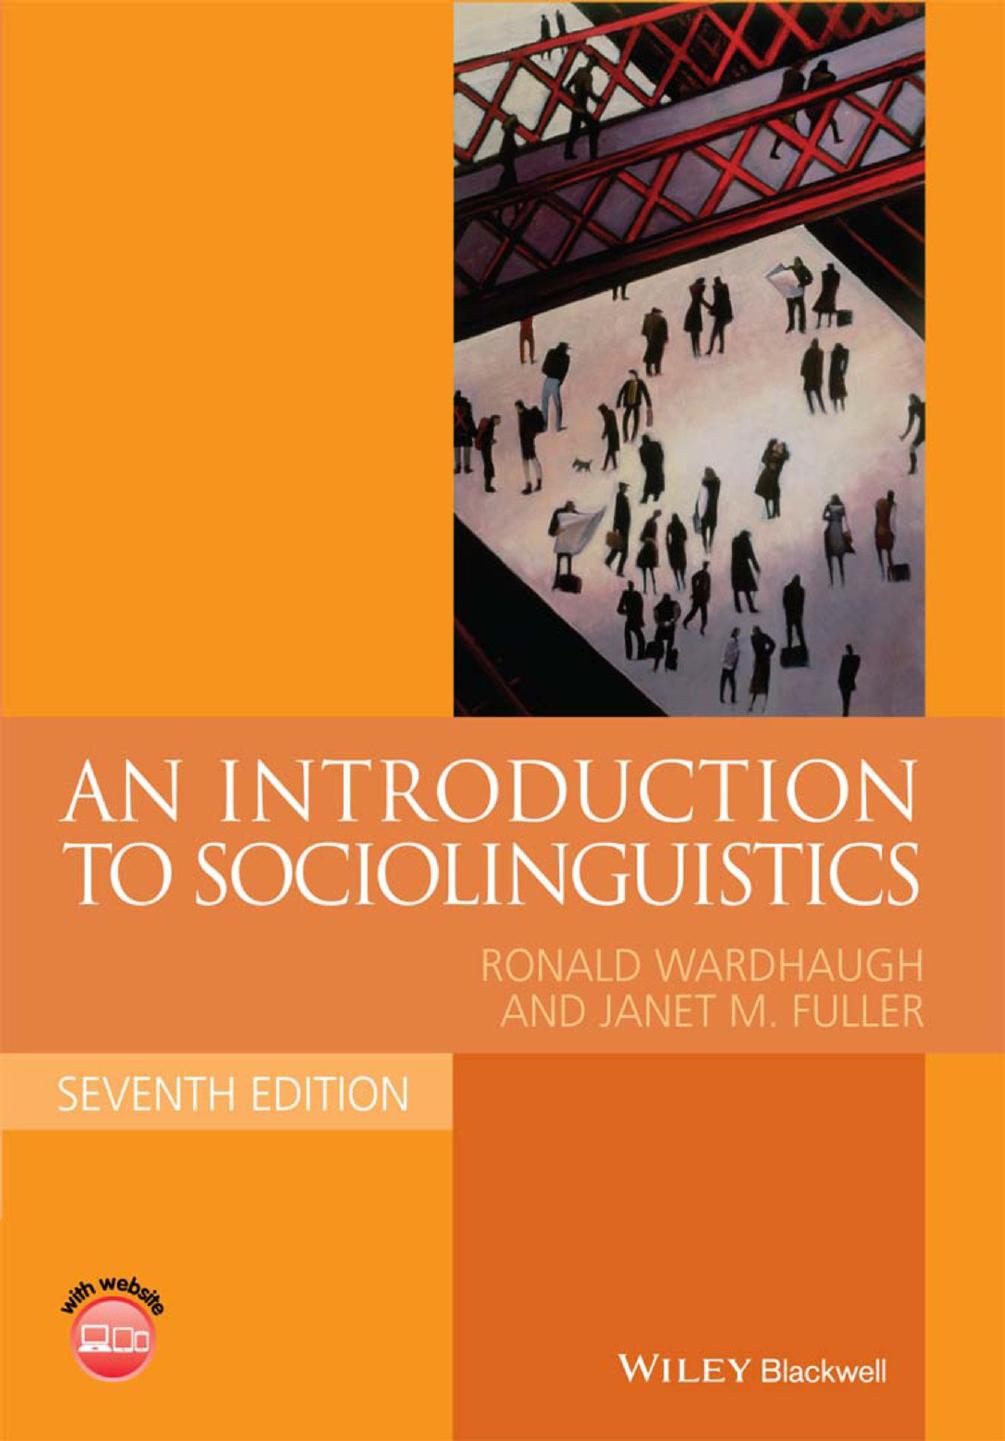 An Introduction to Sociolinguistics - 7th. Edition